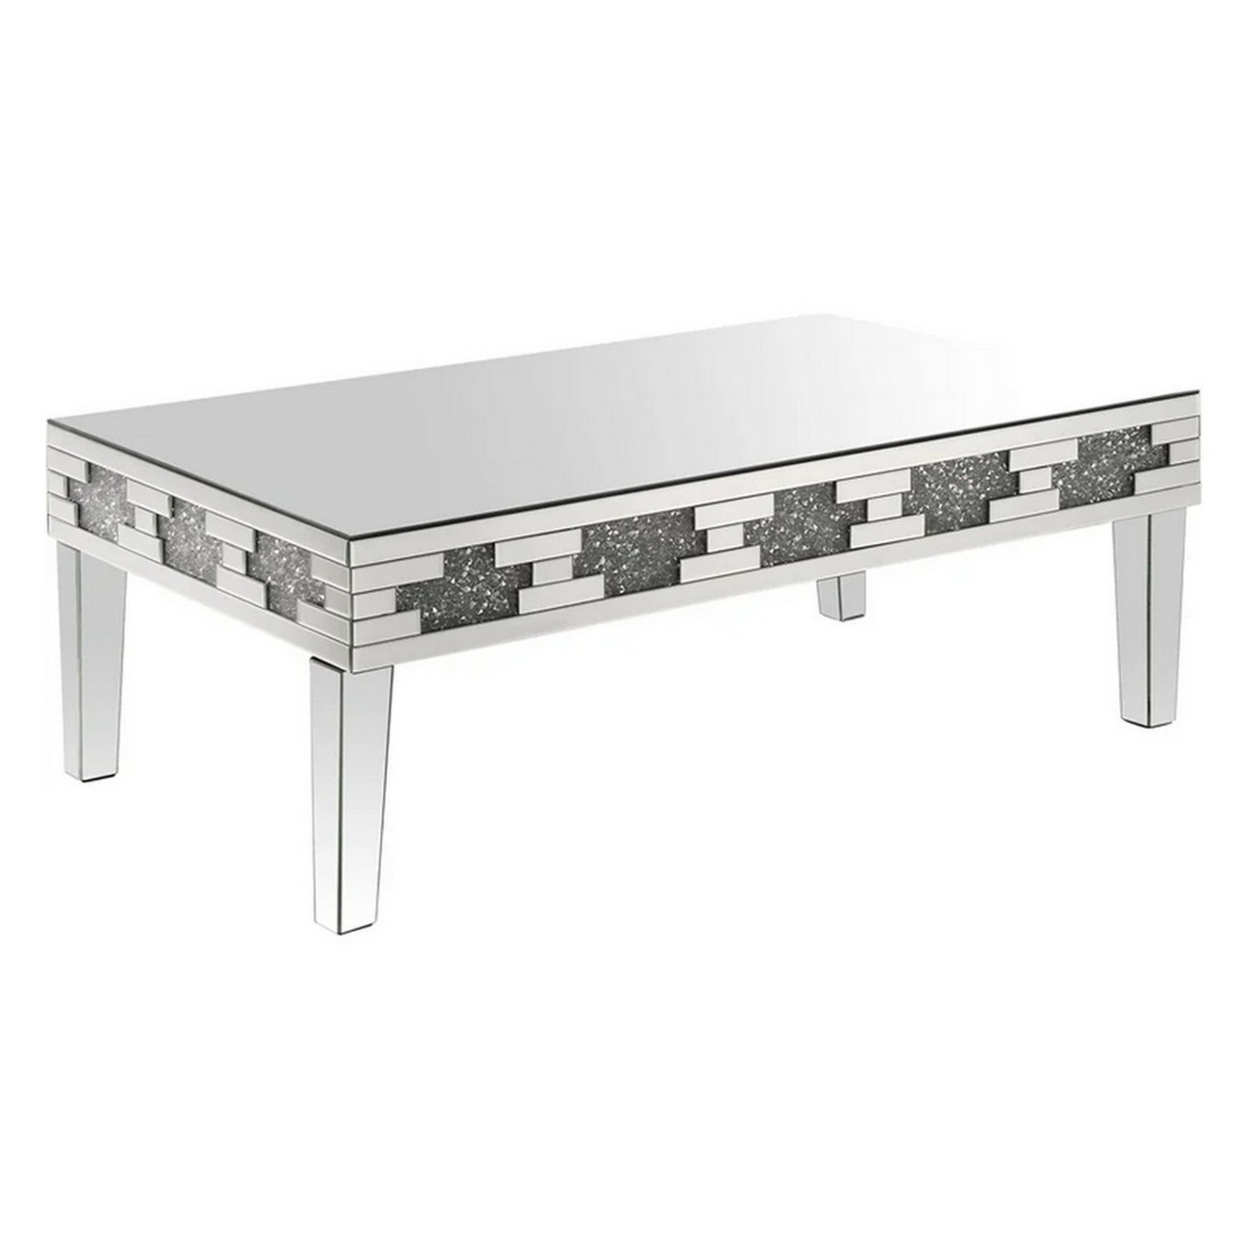 Coffee Table With Mirror Panel Framing And Faux Diamonds, Silver- Saltoro Sherpi